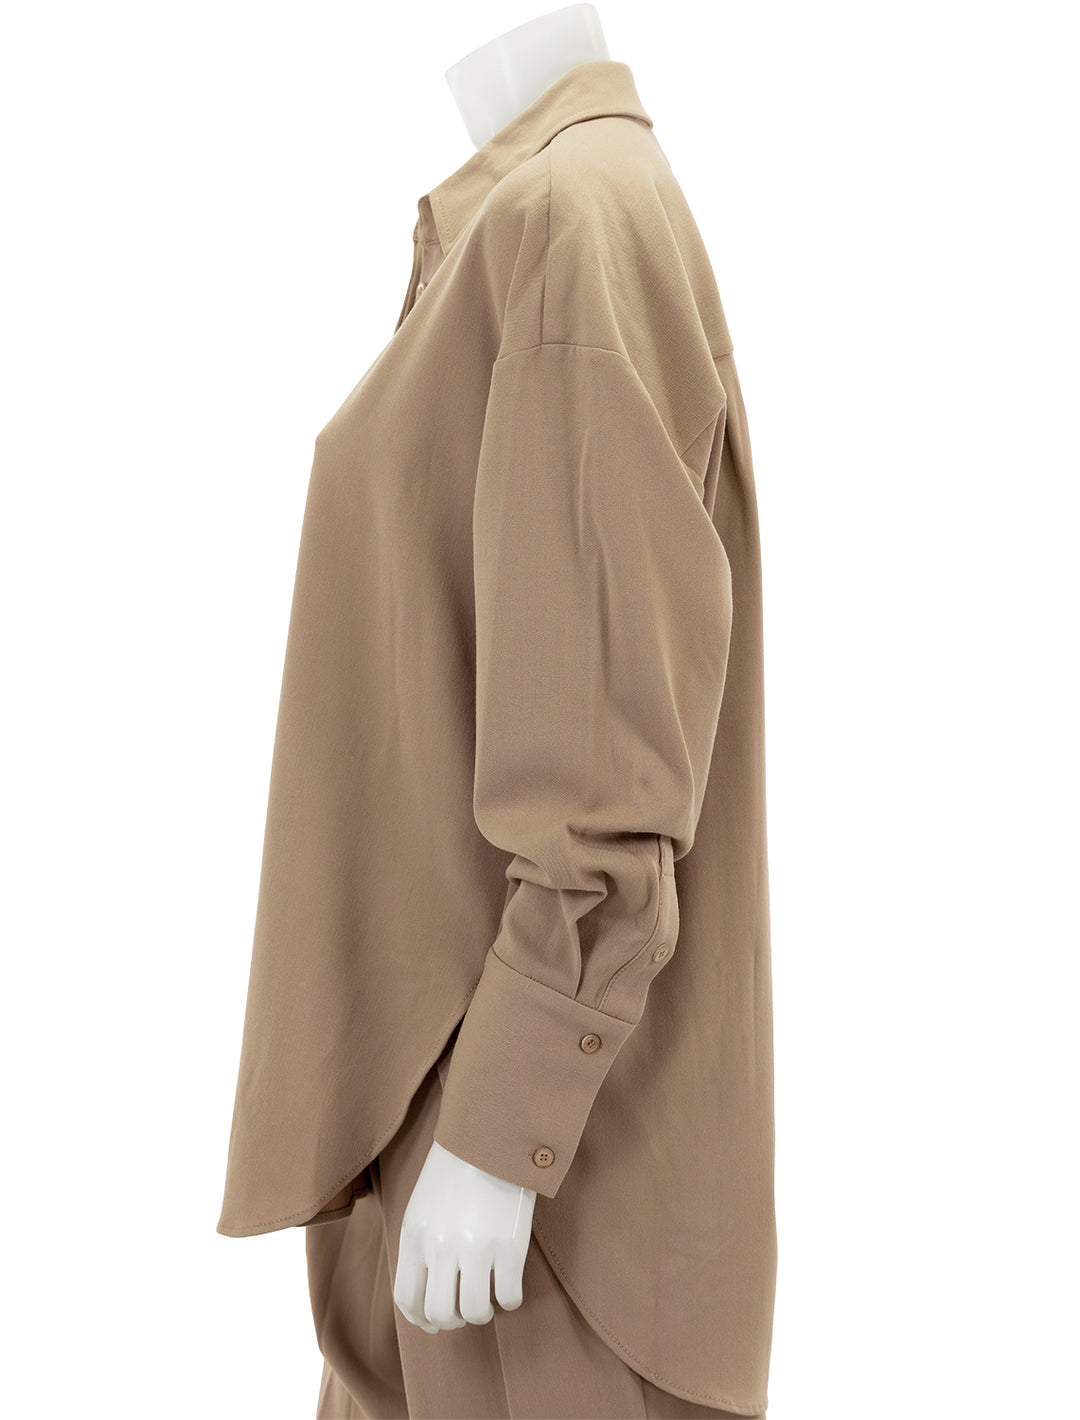 Side view of STAUD's Colton Shirt in Camel.